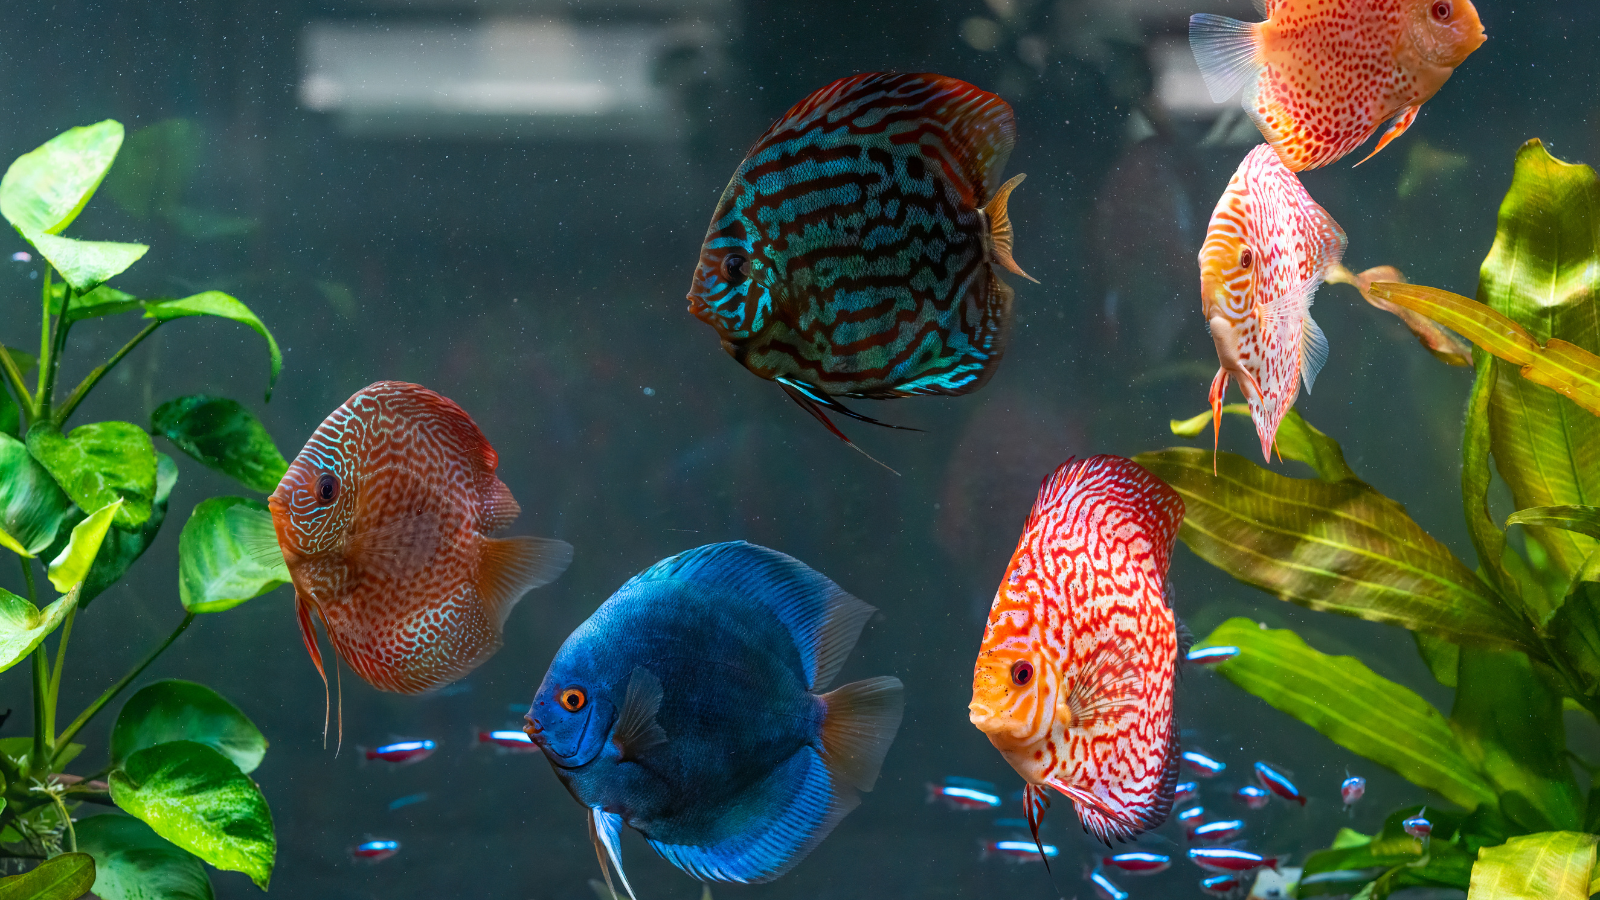 The Discus fish! Legendary and all round better than most fish